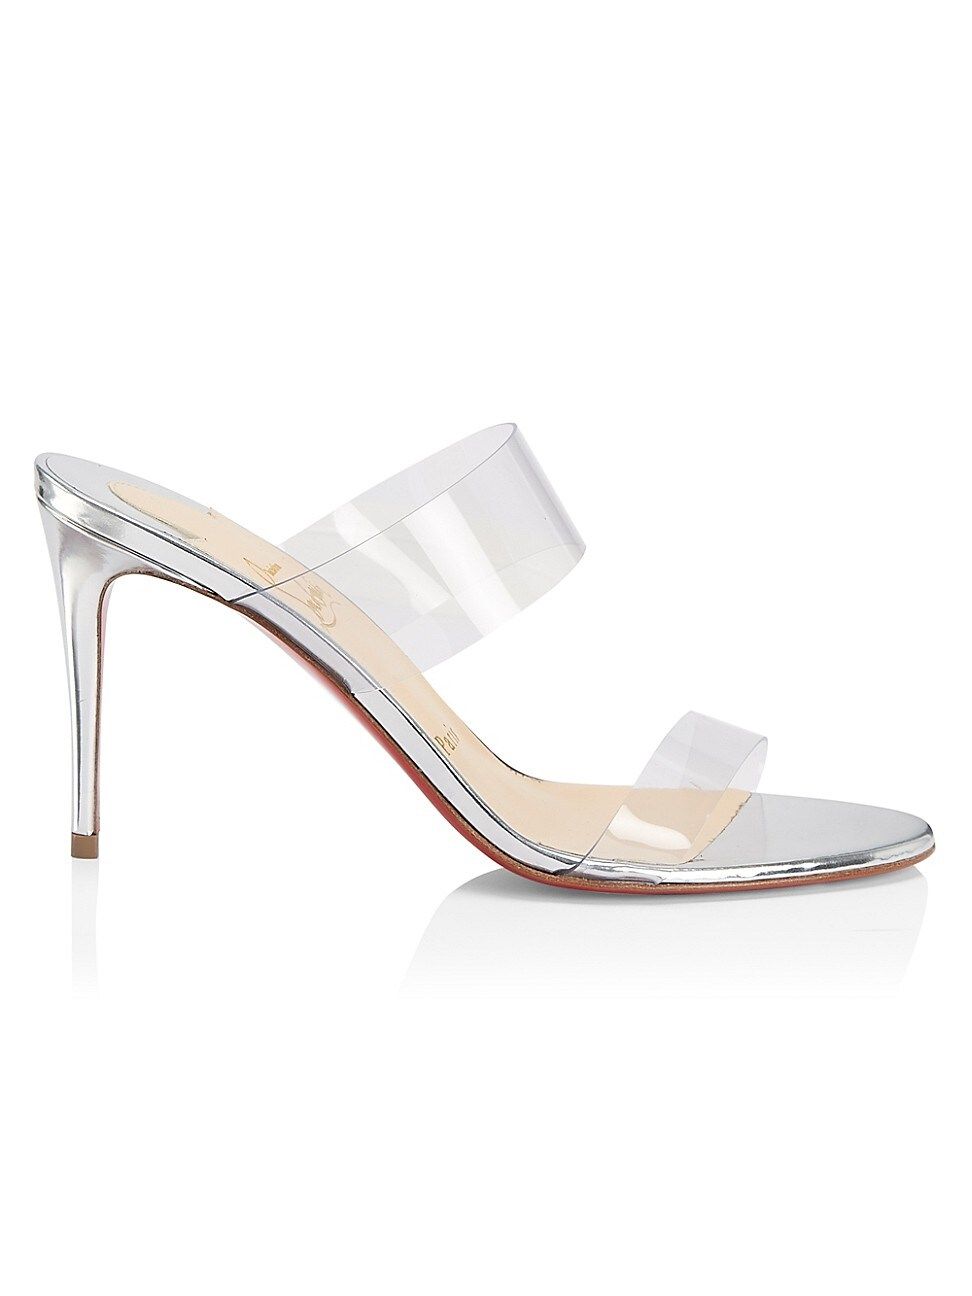 Christian Louboutin Just Nothing PVC & Metallic Leather Mules | Saks Fifth Avenue